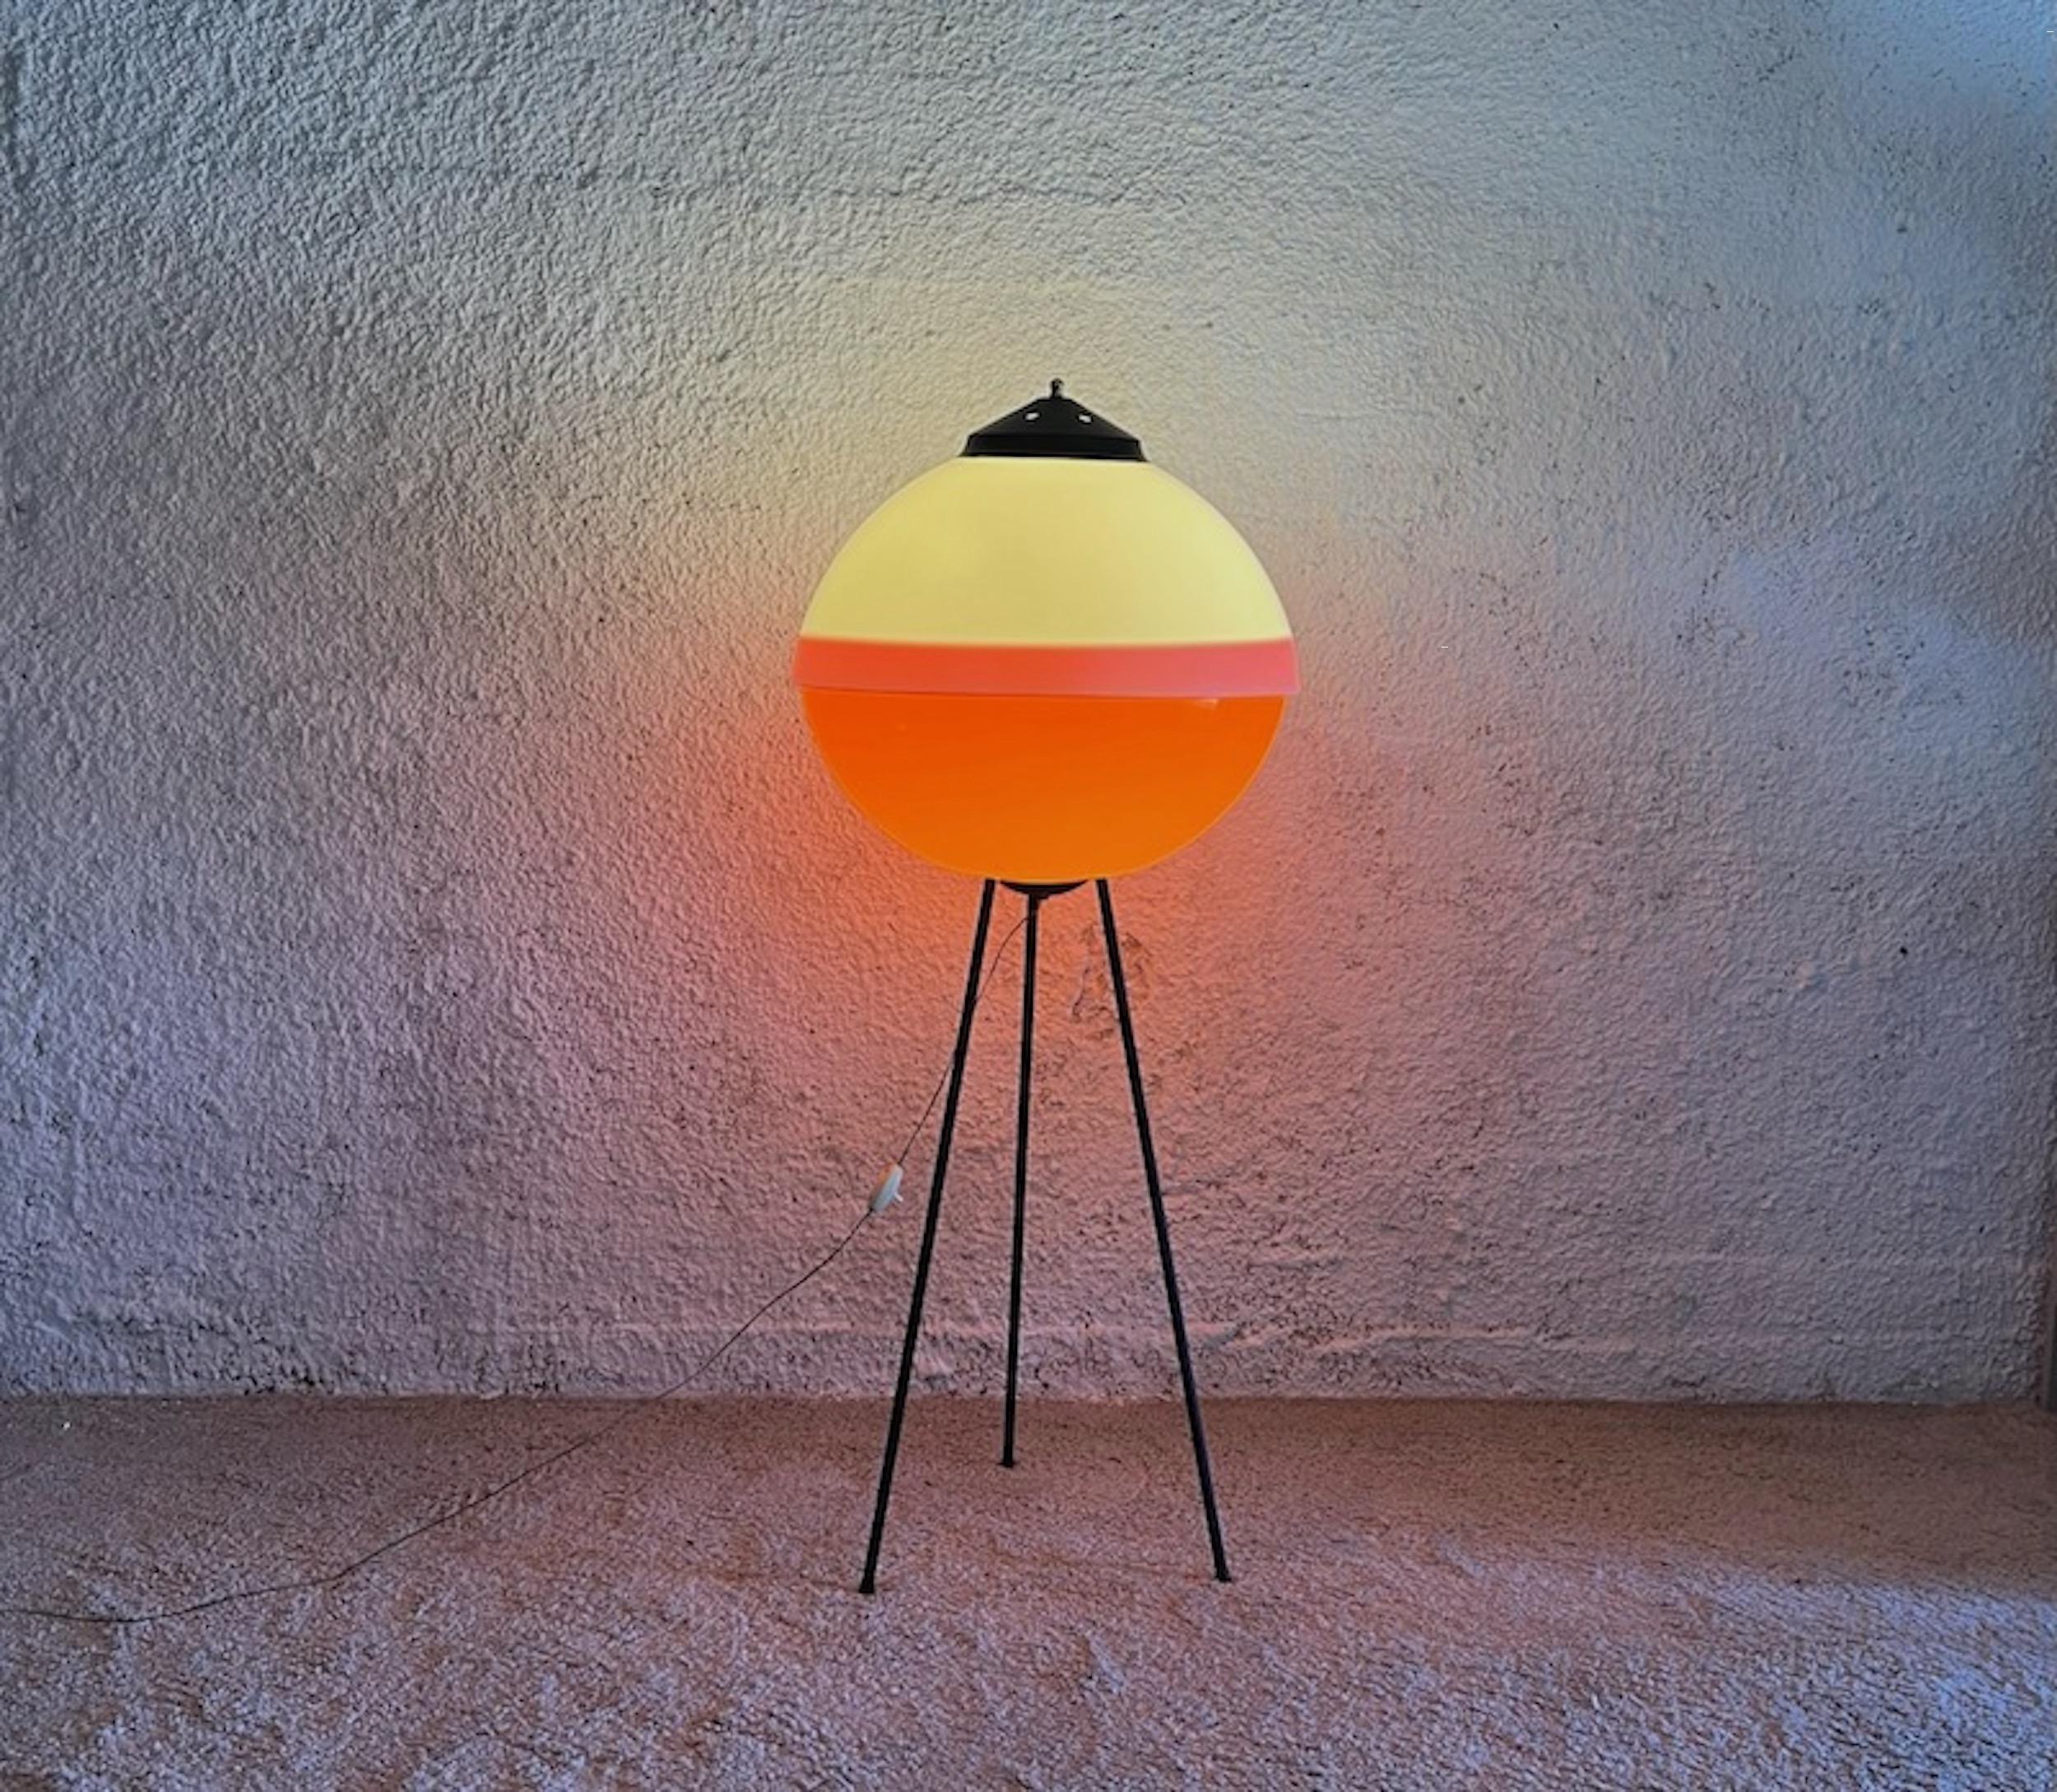 Unique and impressive space age UFO floor lamp with an awesome flying saucer shape made in Italy in the 60s.

The large acrylic lampshade is made of two pieces with the timeless white / orange color match. The tripod made of slender black metal legs